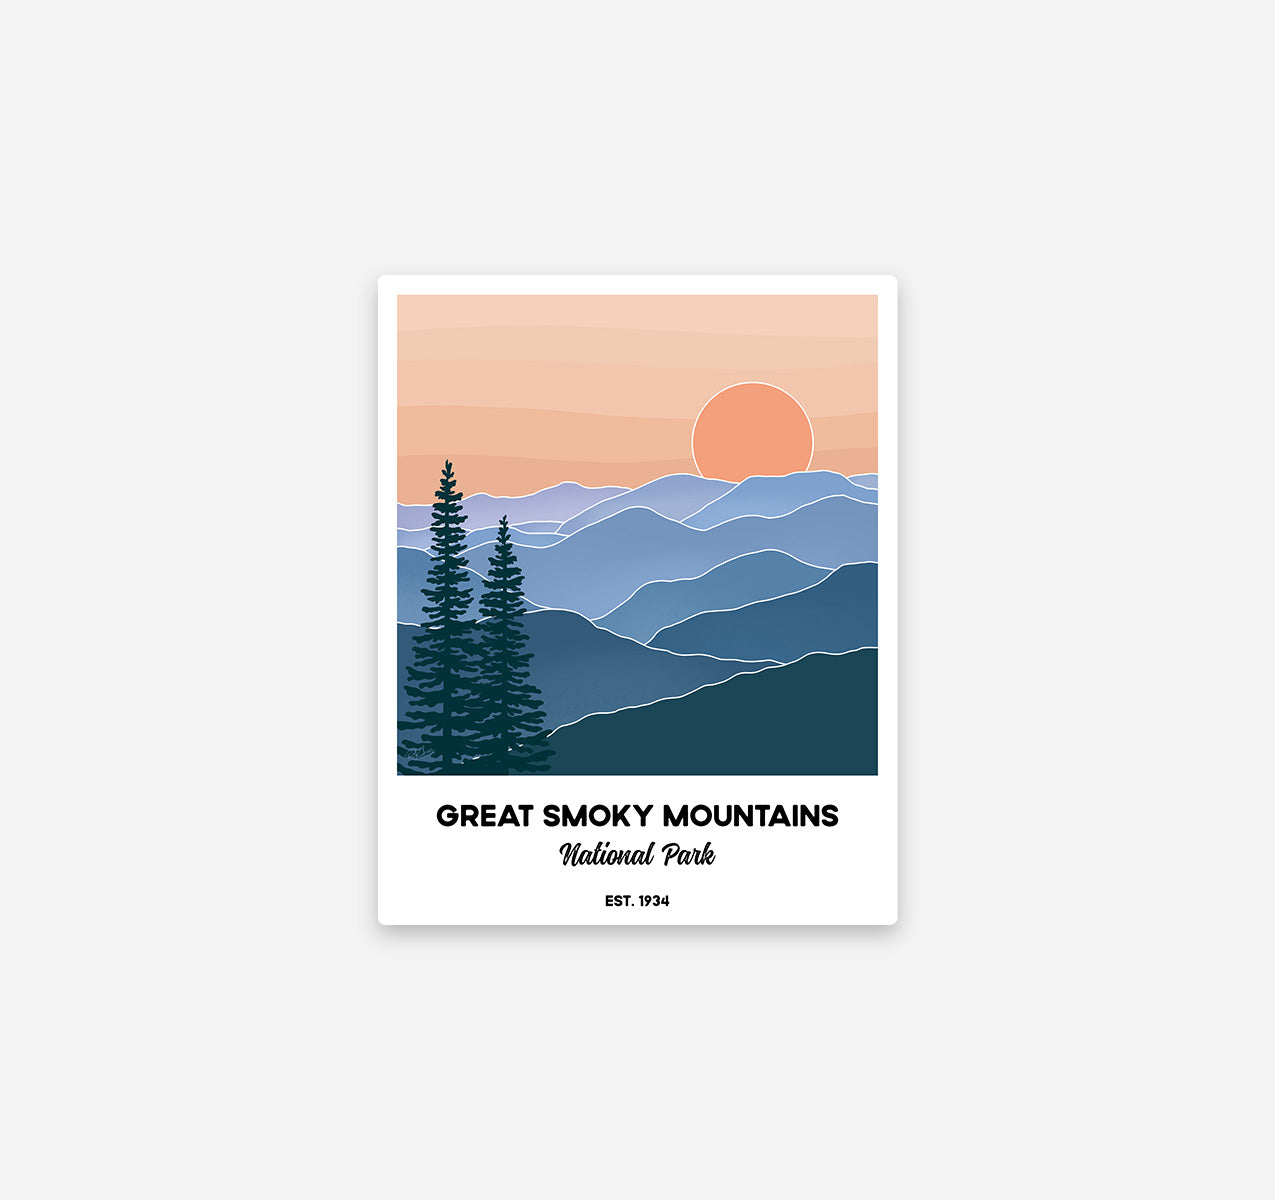 Great Smoky Mountains National Park sticker